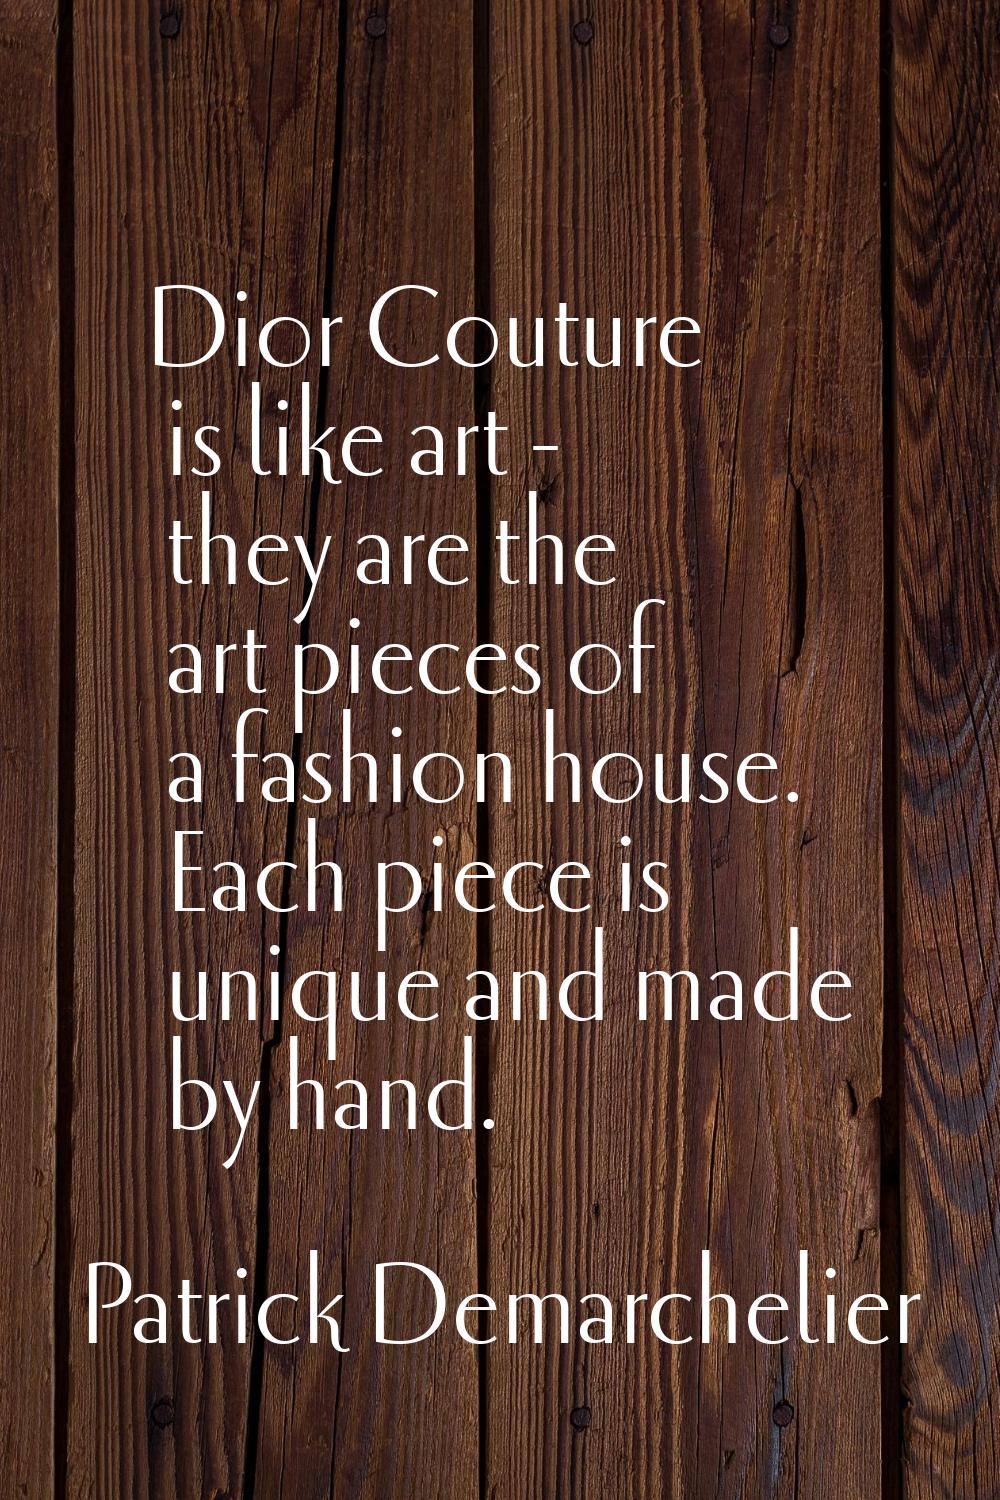 Dior Couture is like art - they are the art pieces of a fashion house. Each piece is unique and mad